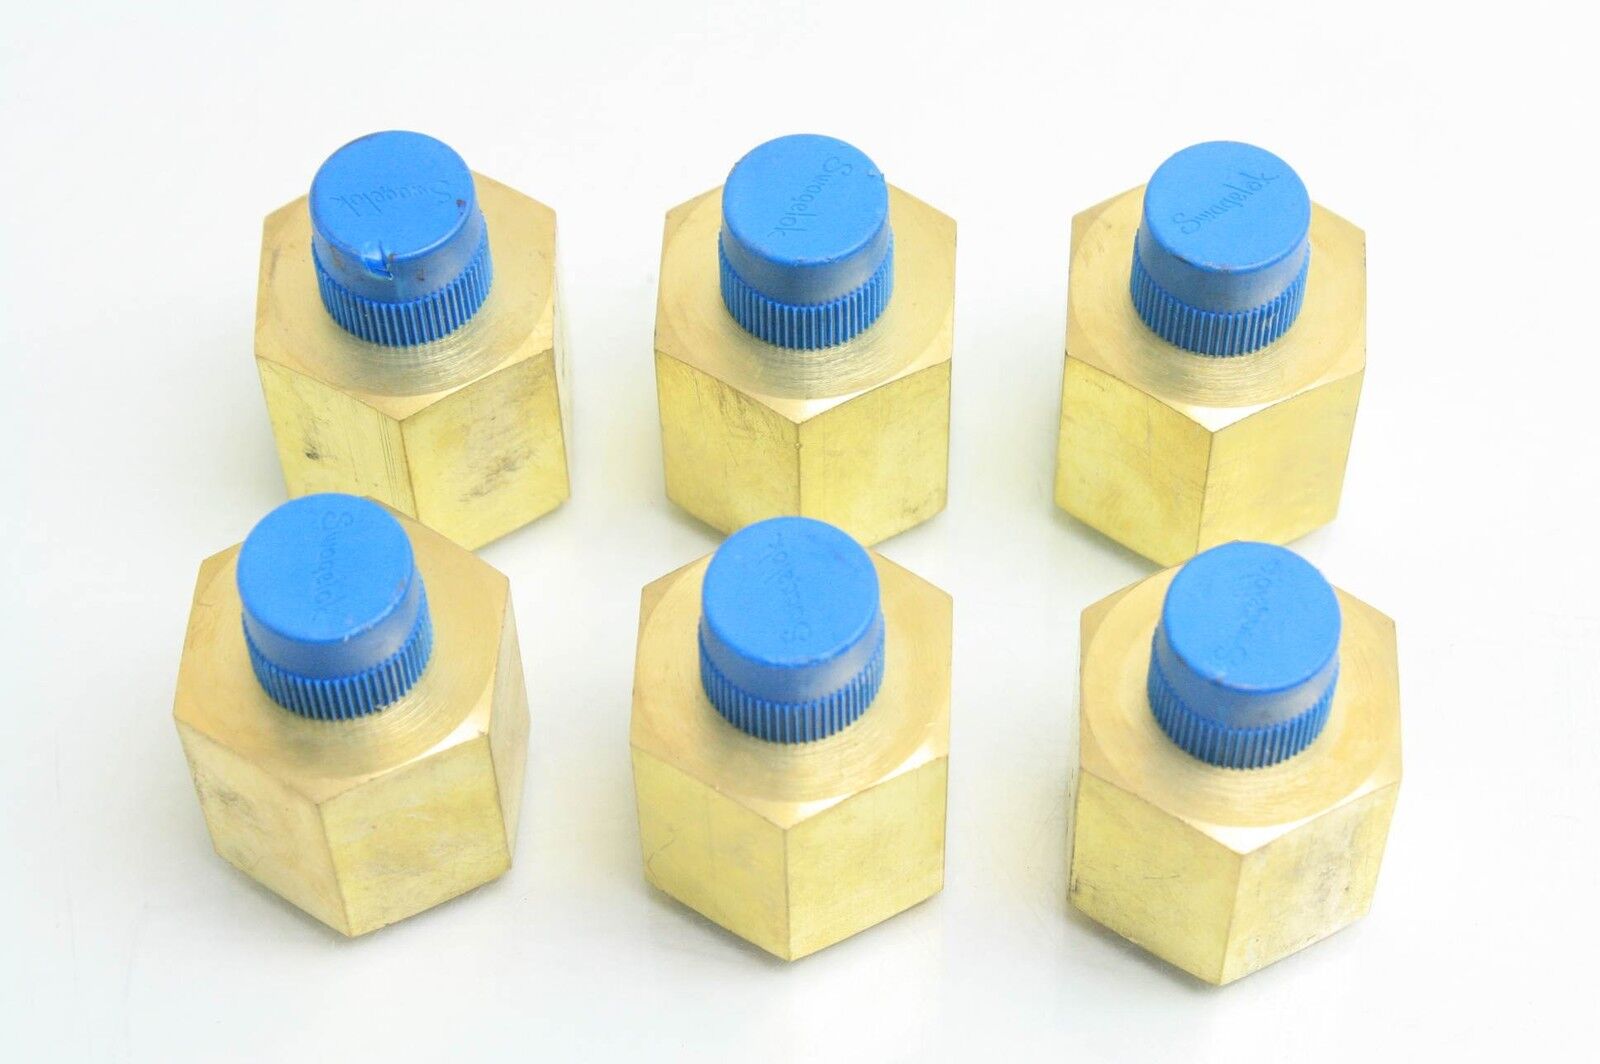 https://surplus.motionconstrained.com/wp-content/uploads/imported/2/6-Swagelok-B-12-RA-6-Brass-Reducing-Pipe-Fittings-Adapters-38-MNPT-x-34-FNPT-New-other-see-details-181639490242.jpg